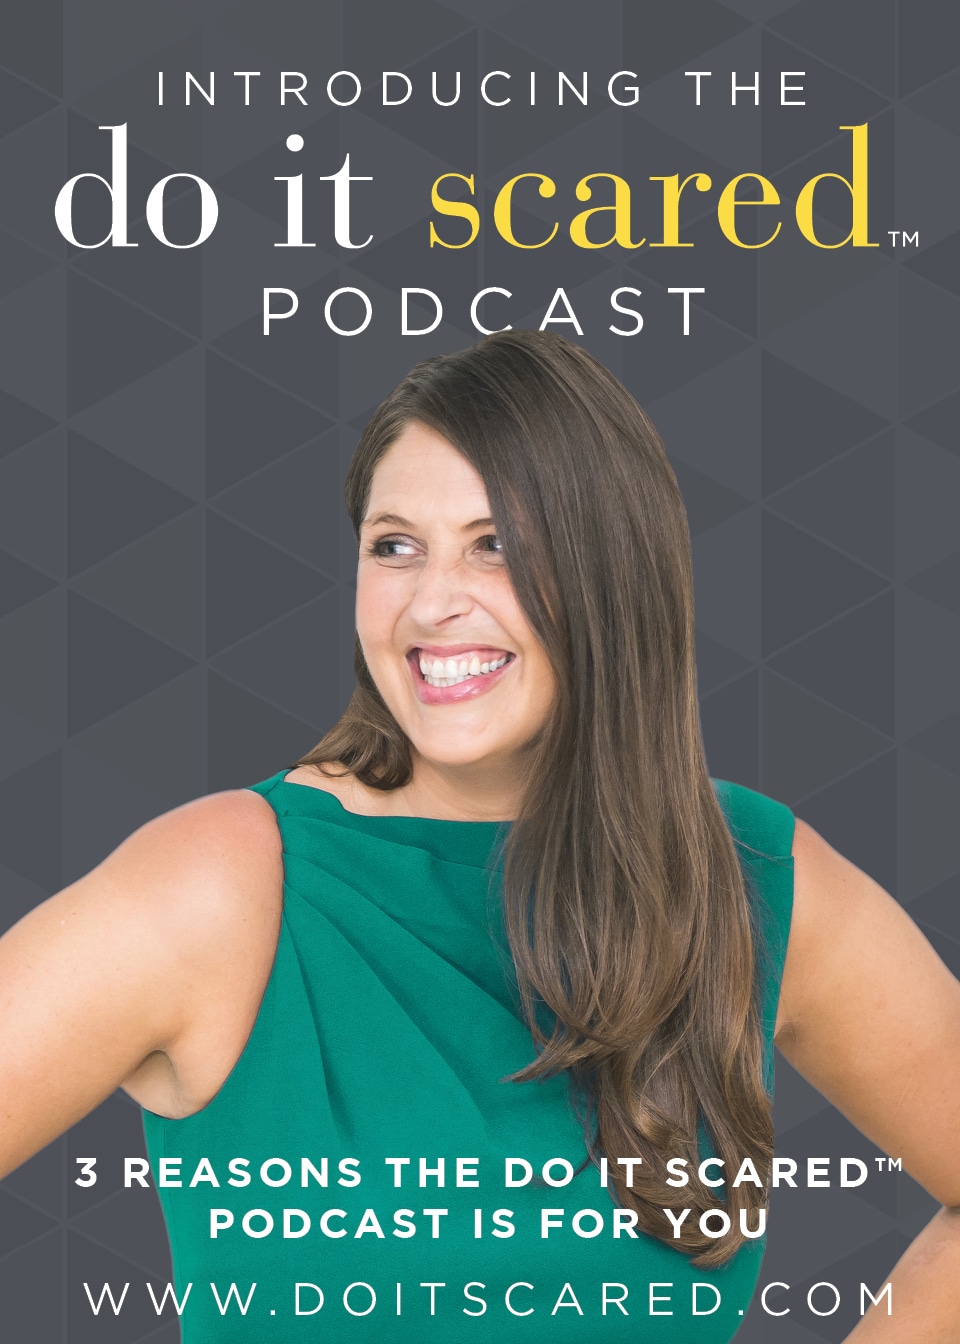 What would you do if fear no longer stood in your way? Courage is simply just action in the face of fear. Are YOU ready to join the #doitscaredmovement? Here's 3 reasons why you should subscribe! #doitscaredpodcast